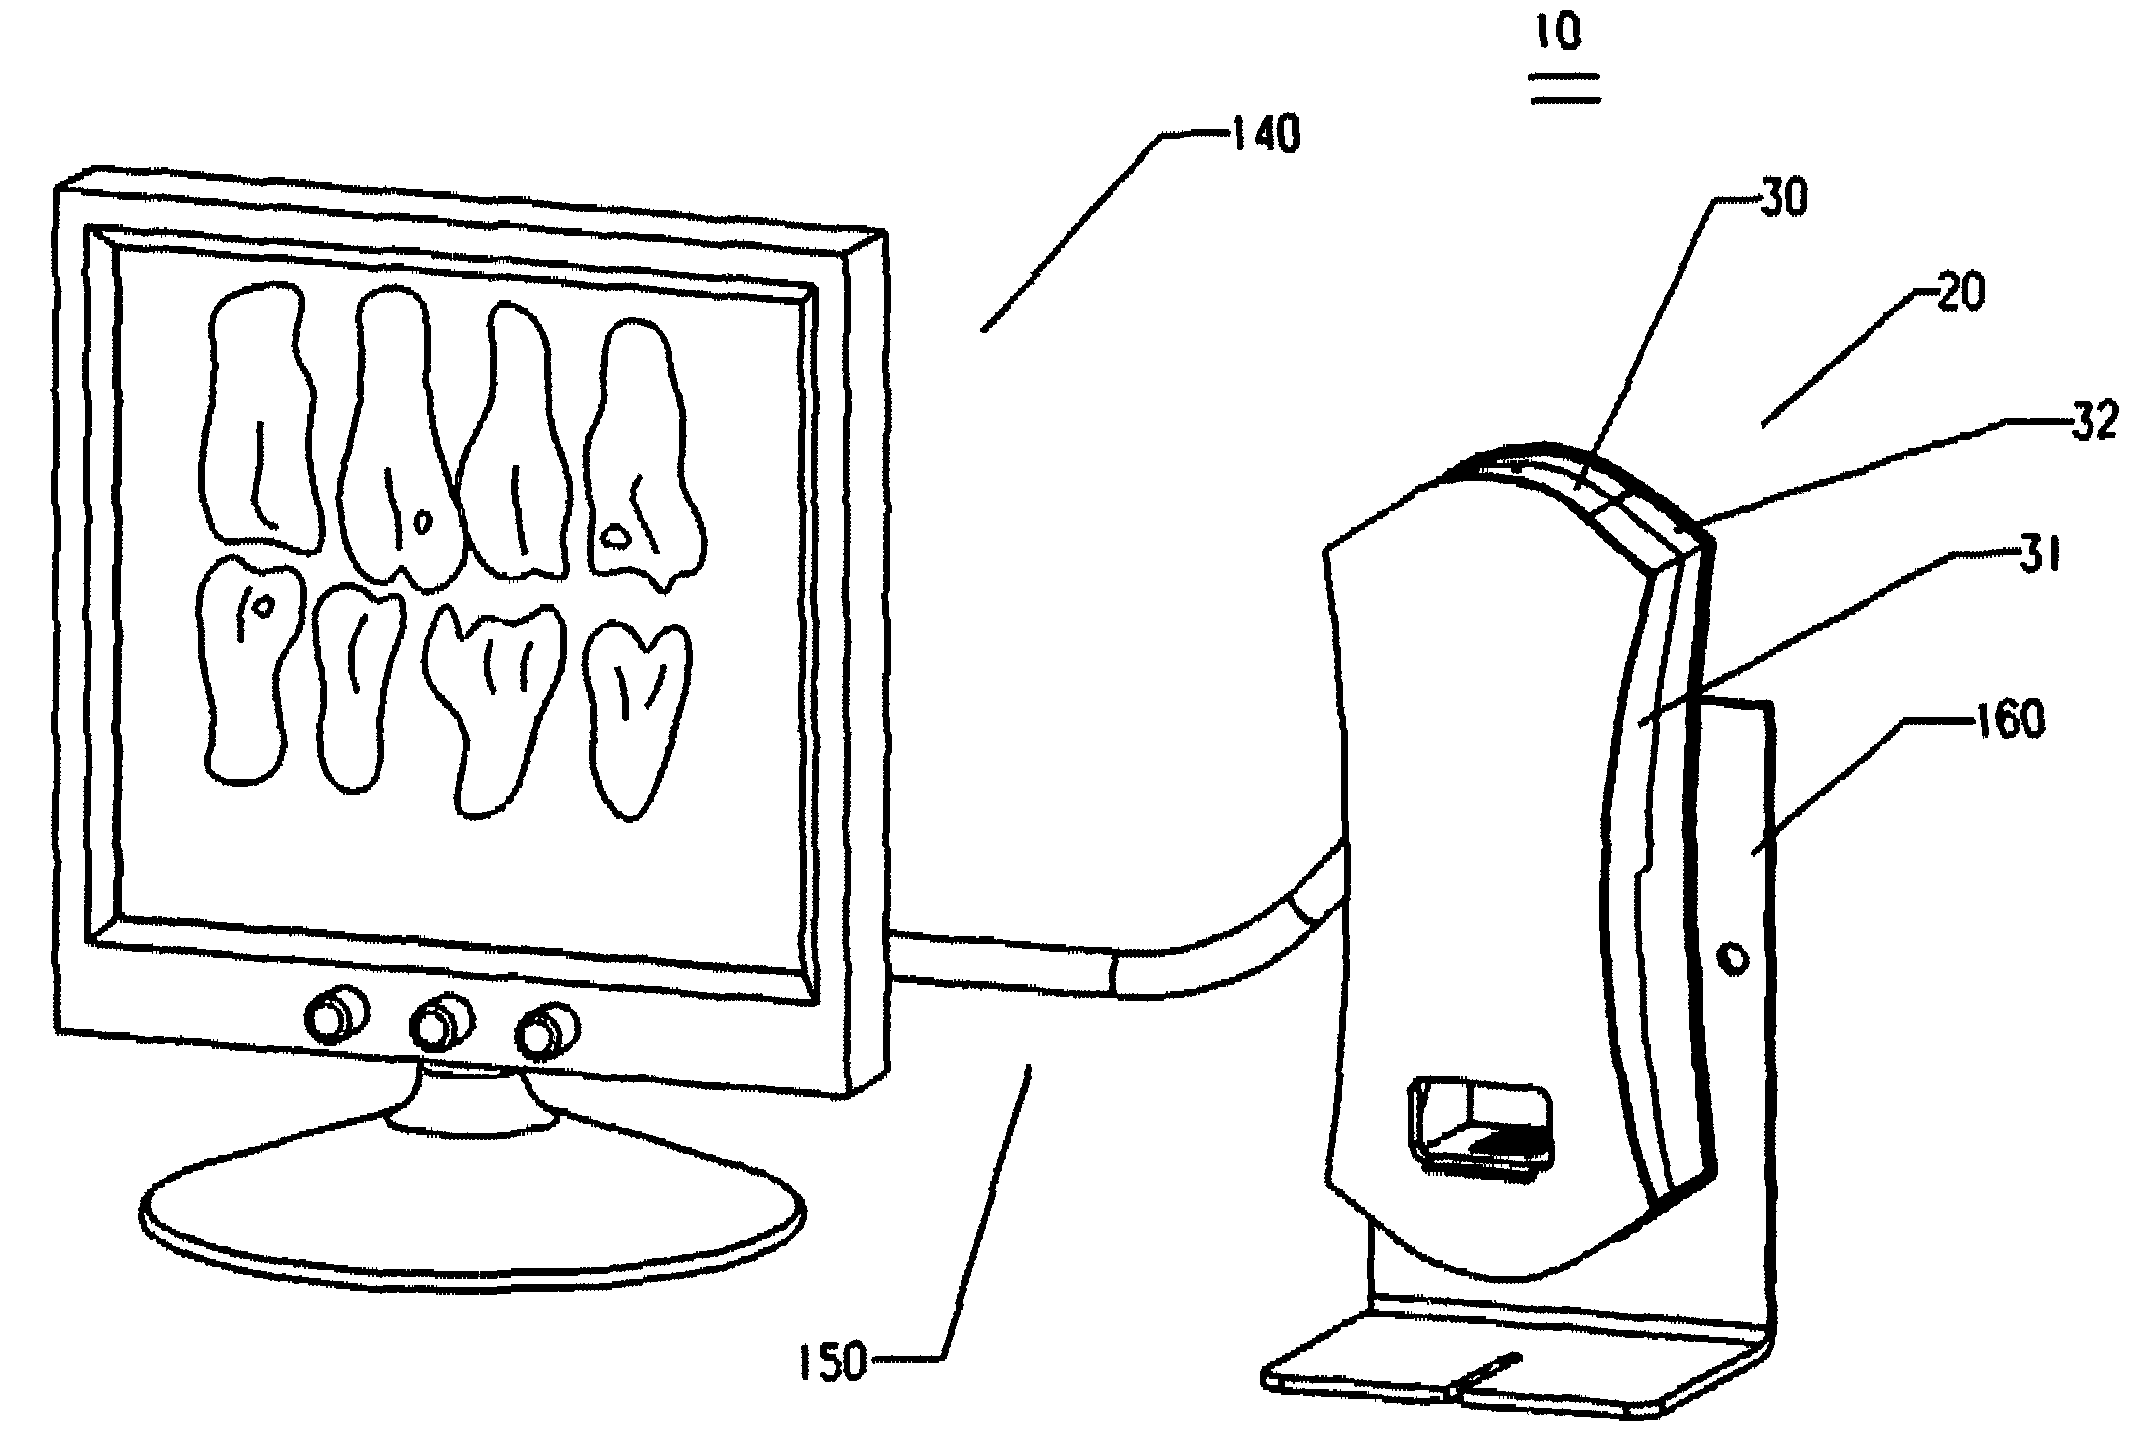 Dental x-ray film viewing device